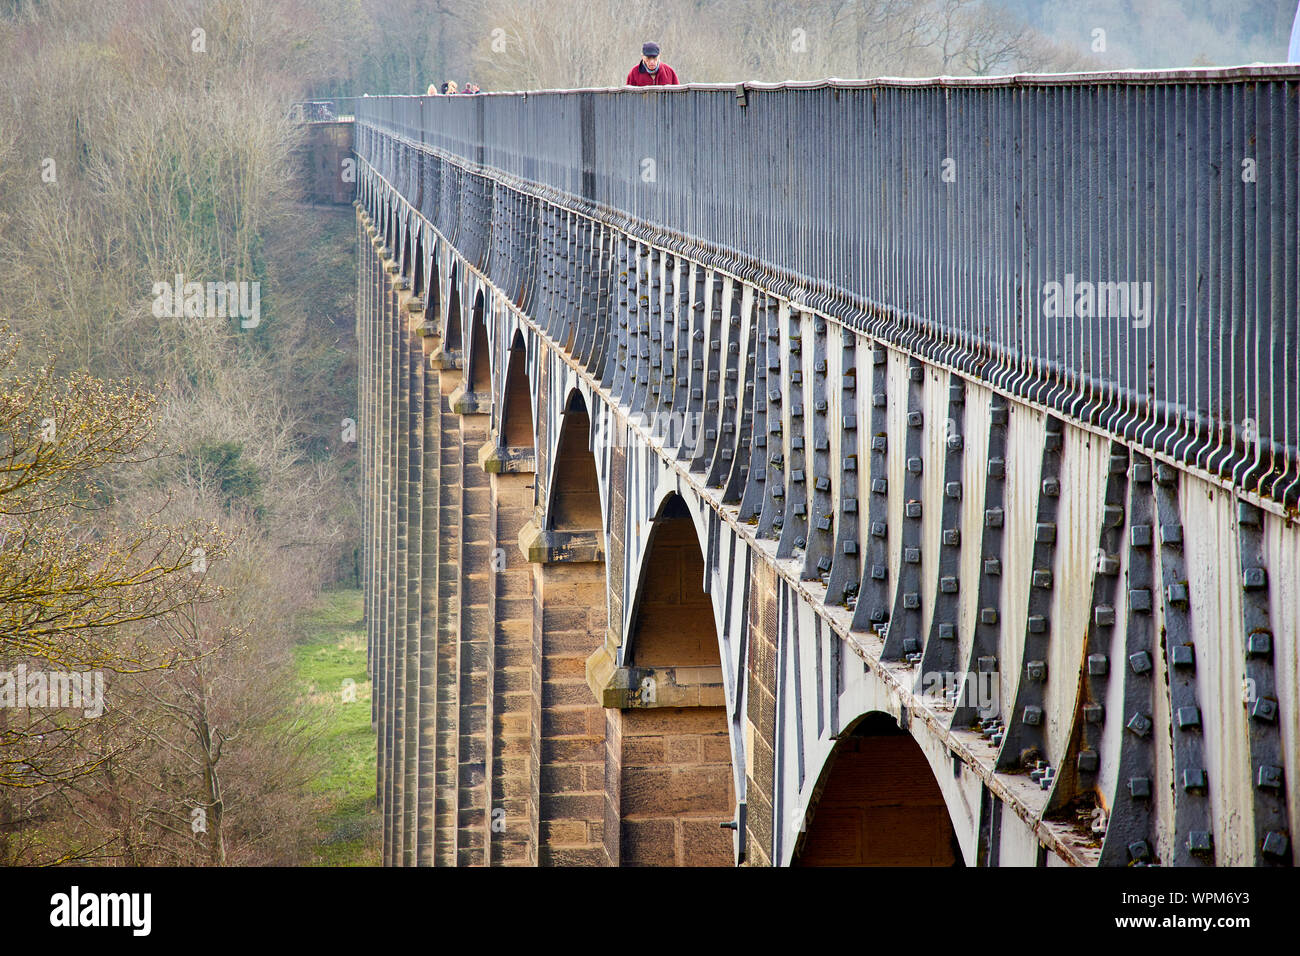 View along the side of the Pontcysyllte Aqueduct carrying the Llangollen canal over the river Dee in Denbighshire Wales with a man in red walking across Stock Photo